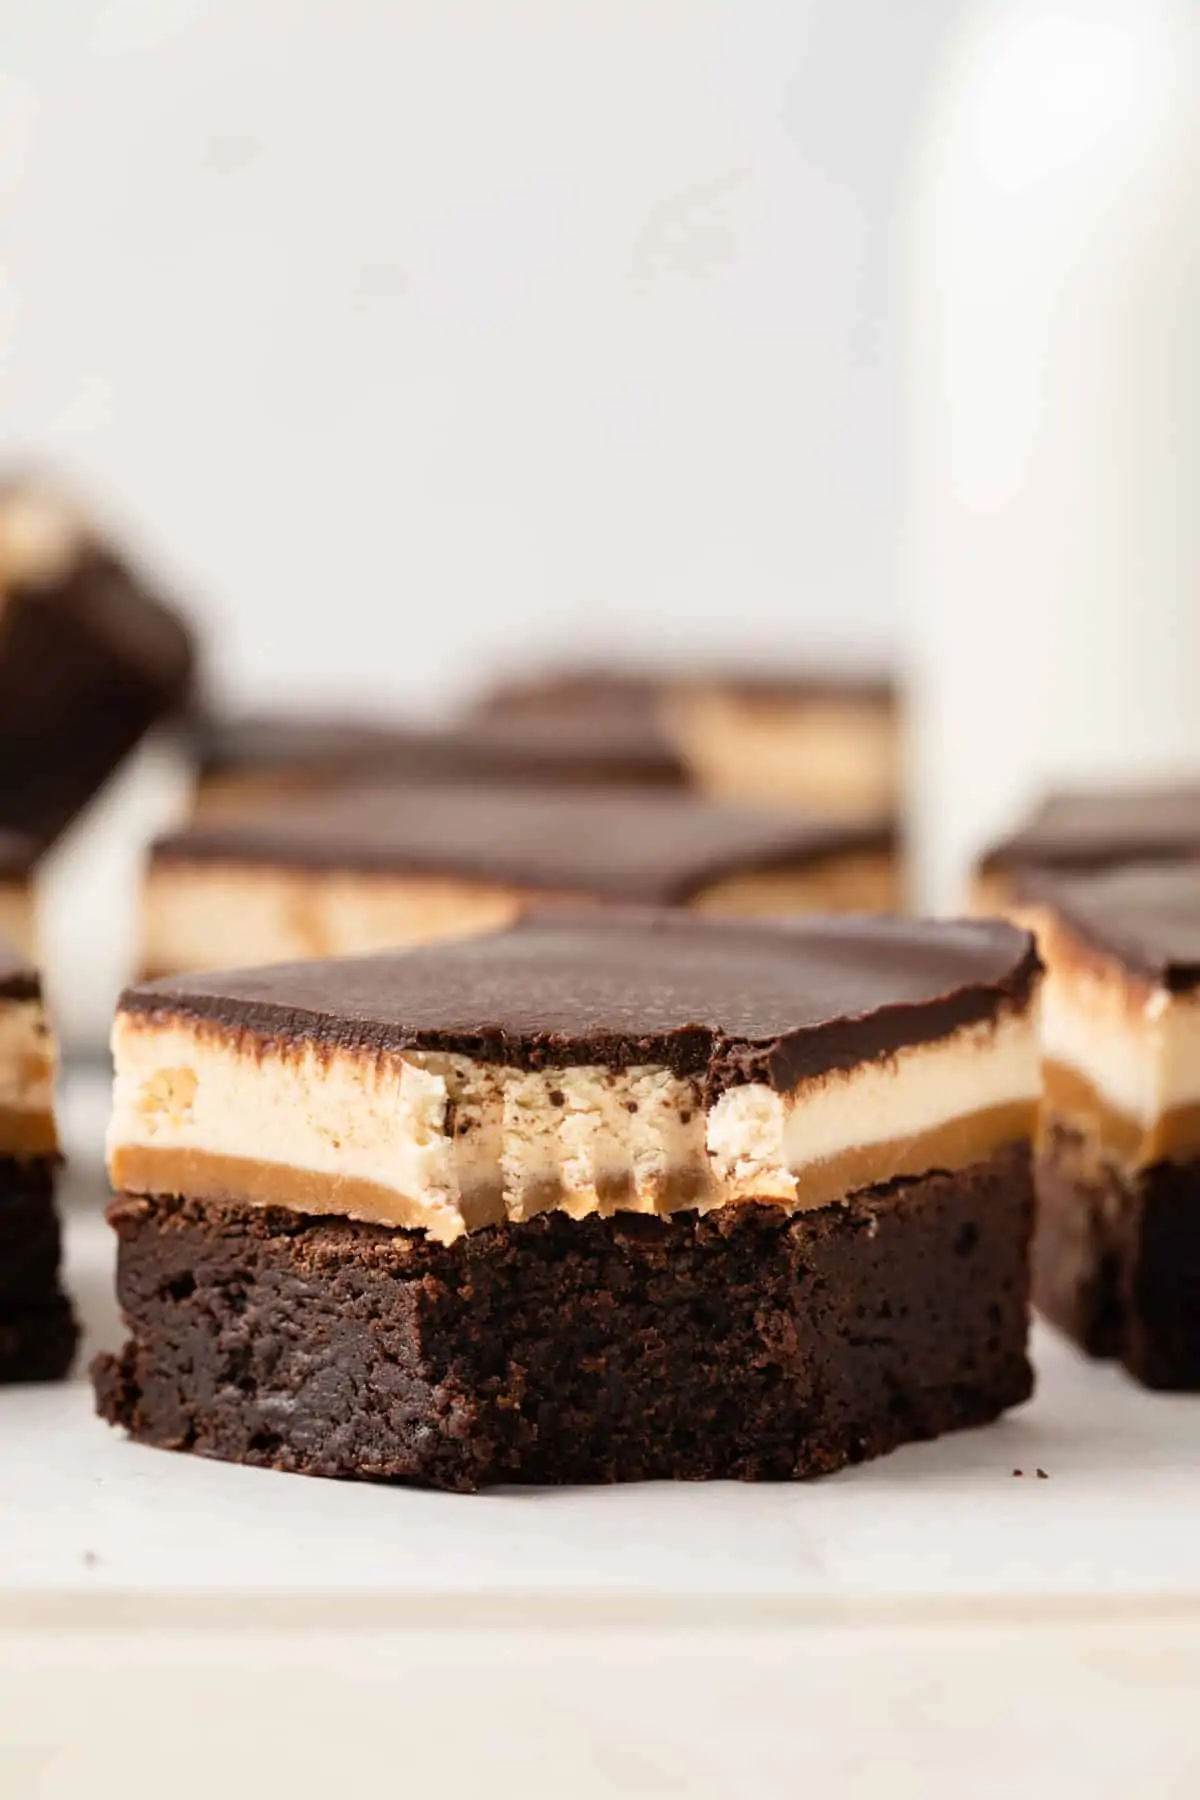 A fudgy chocolate brownie with layers of gooey caramel, chewy nougat, and chocolate ganache over the top sitting on white parchment paper with a fork taking a bite out.